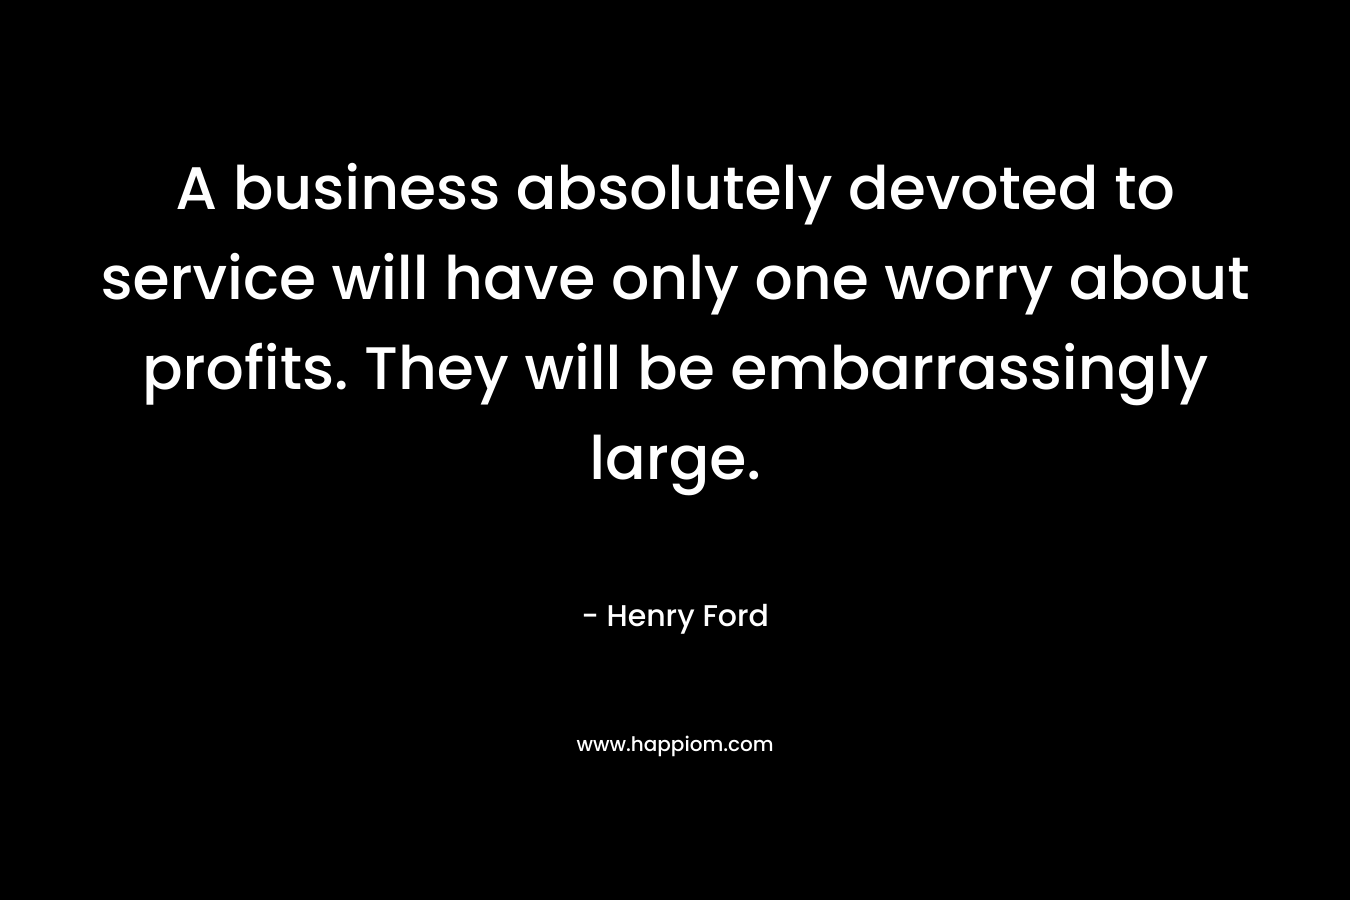 A business absolutely devoted to service will have only one worry about profits. They will be embarrassingly large.